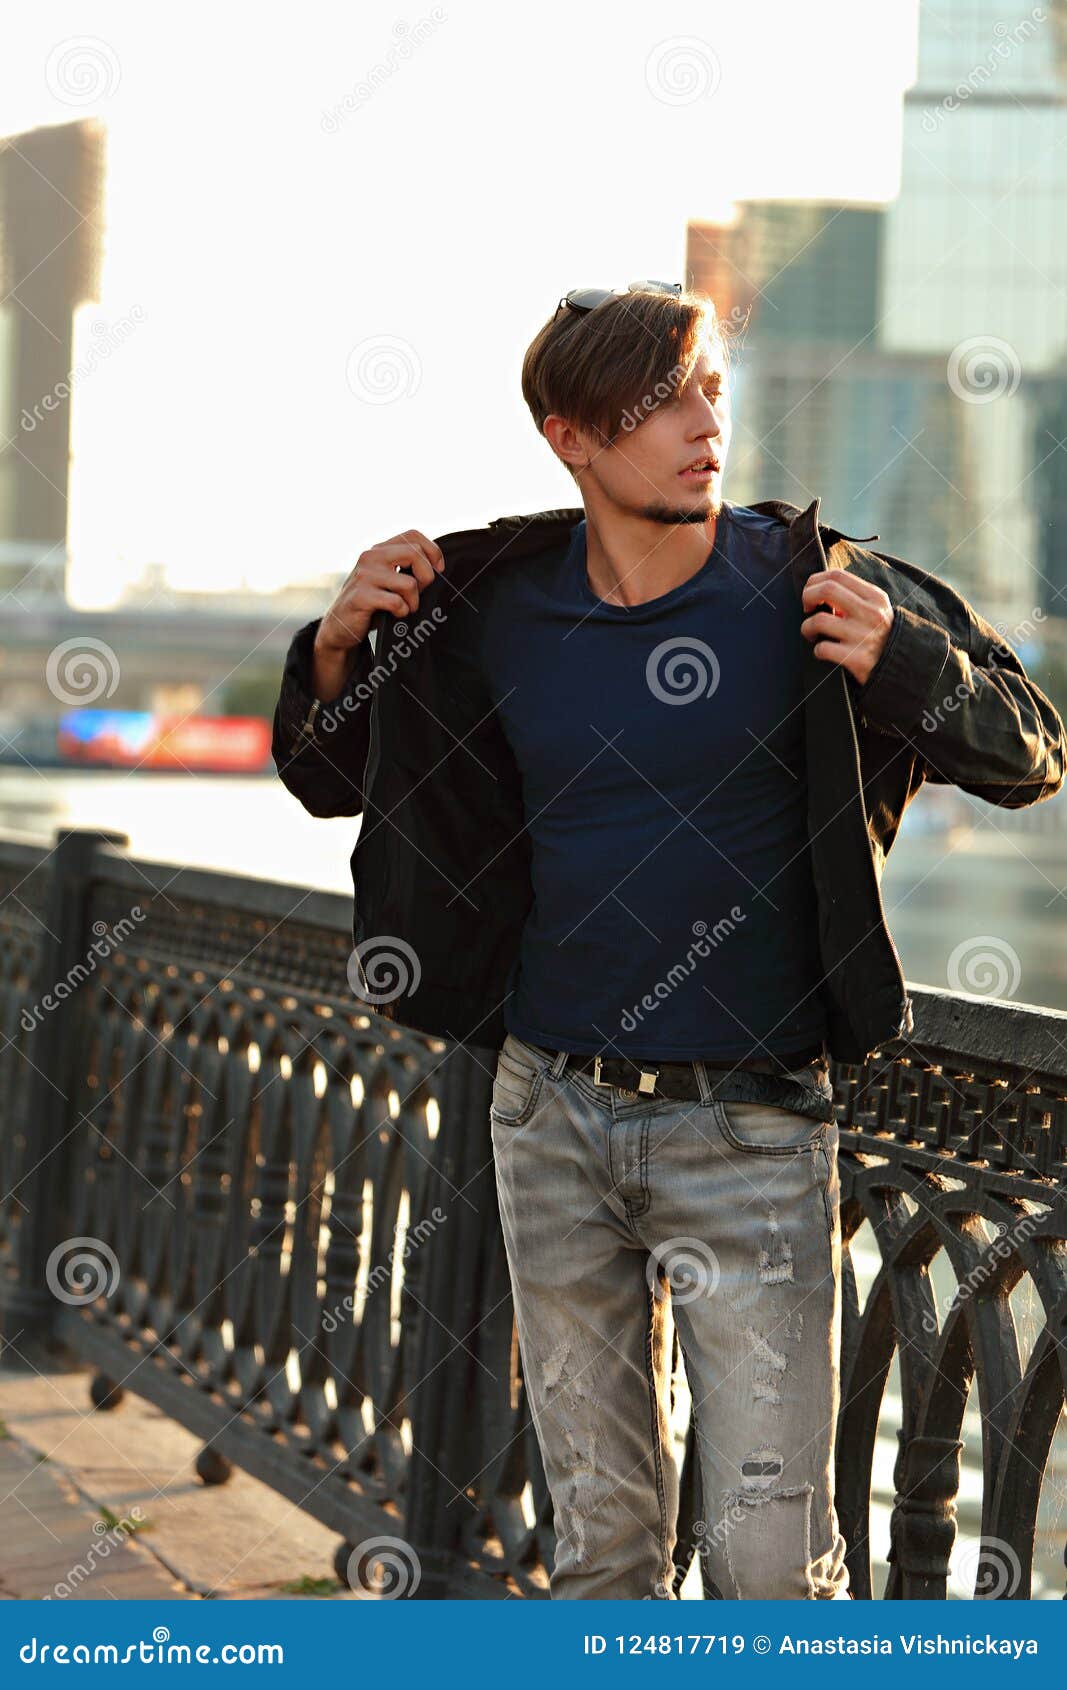 Thinking Handsome Young Man Walking In Fashion Jeans And Dressing The ...